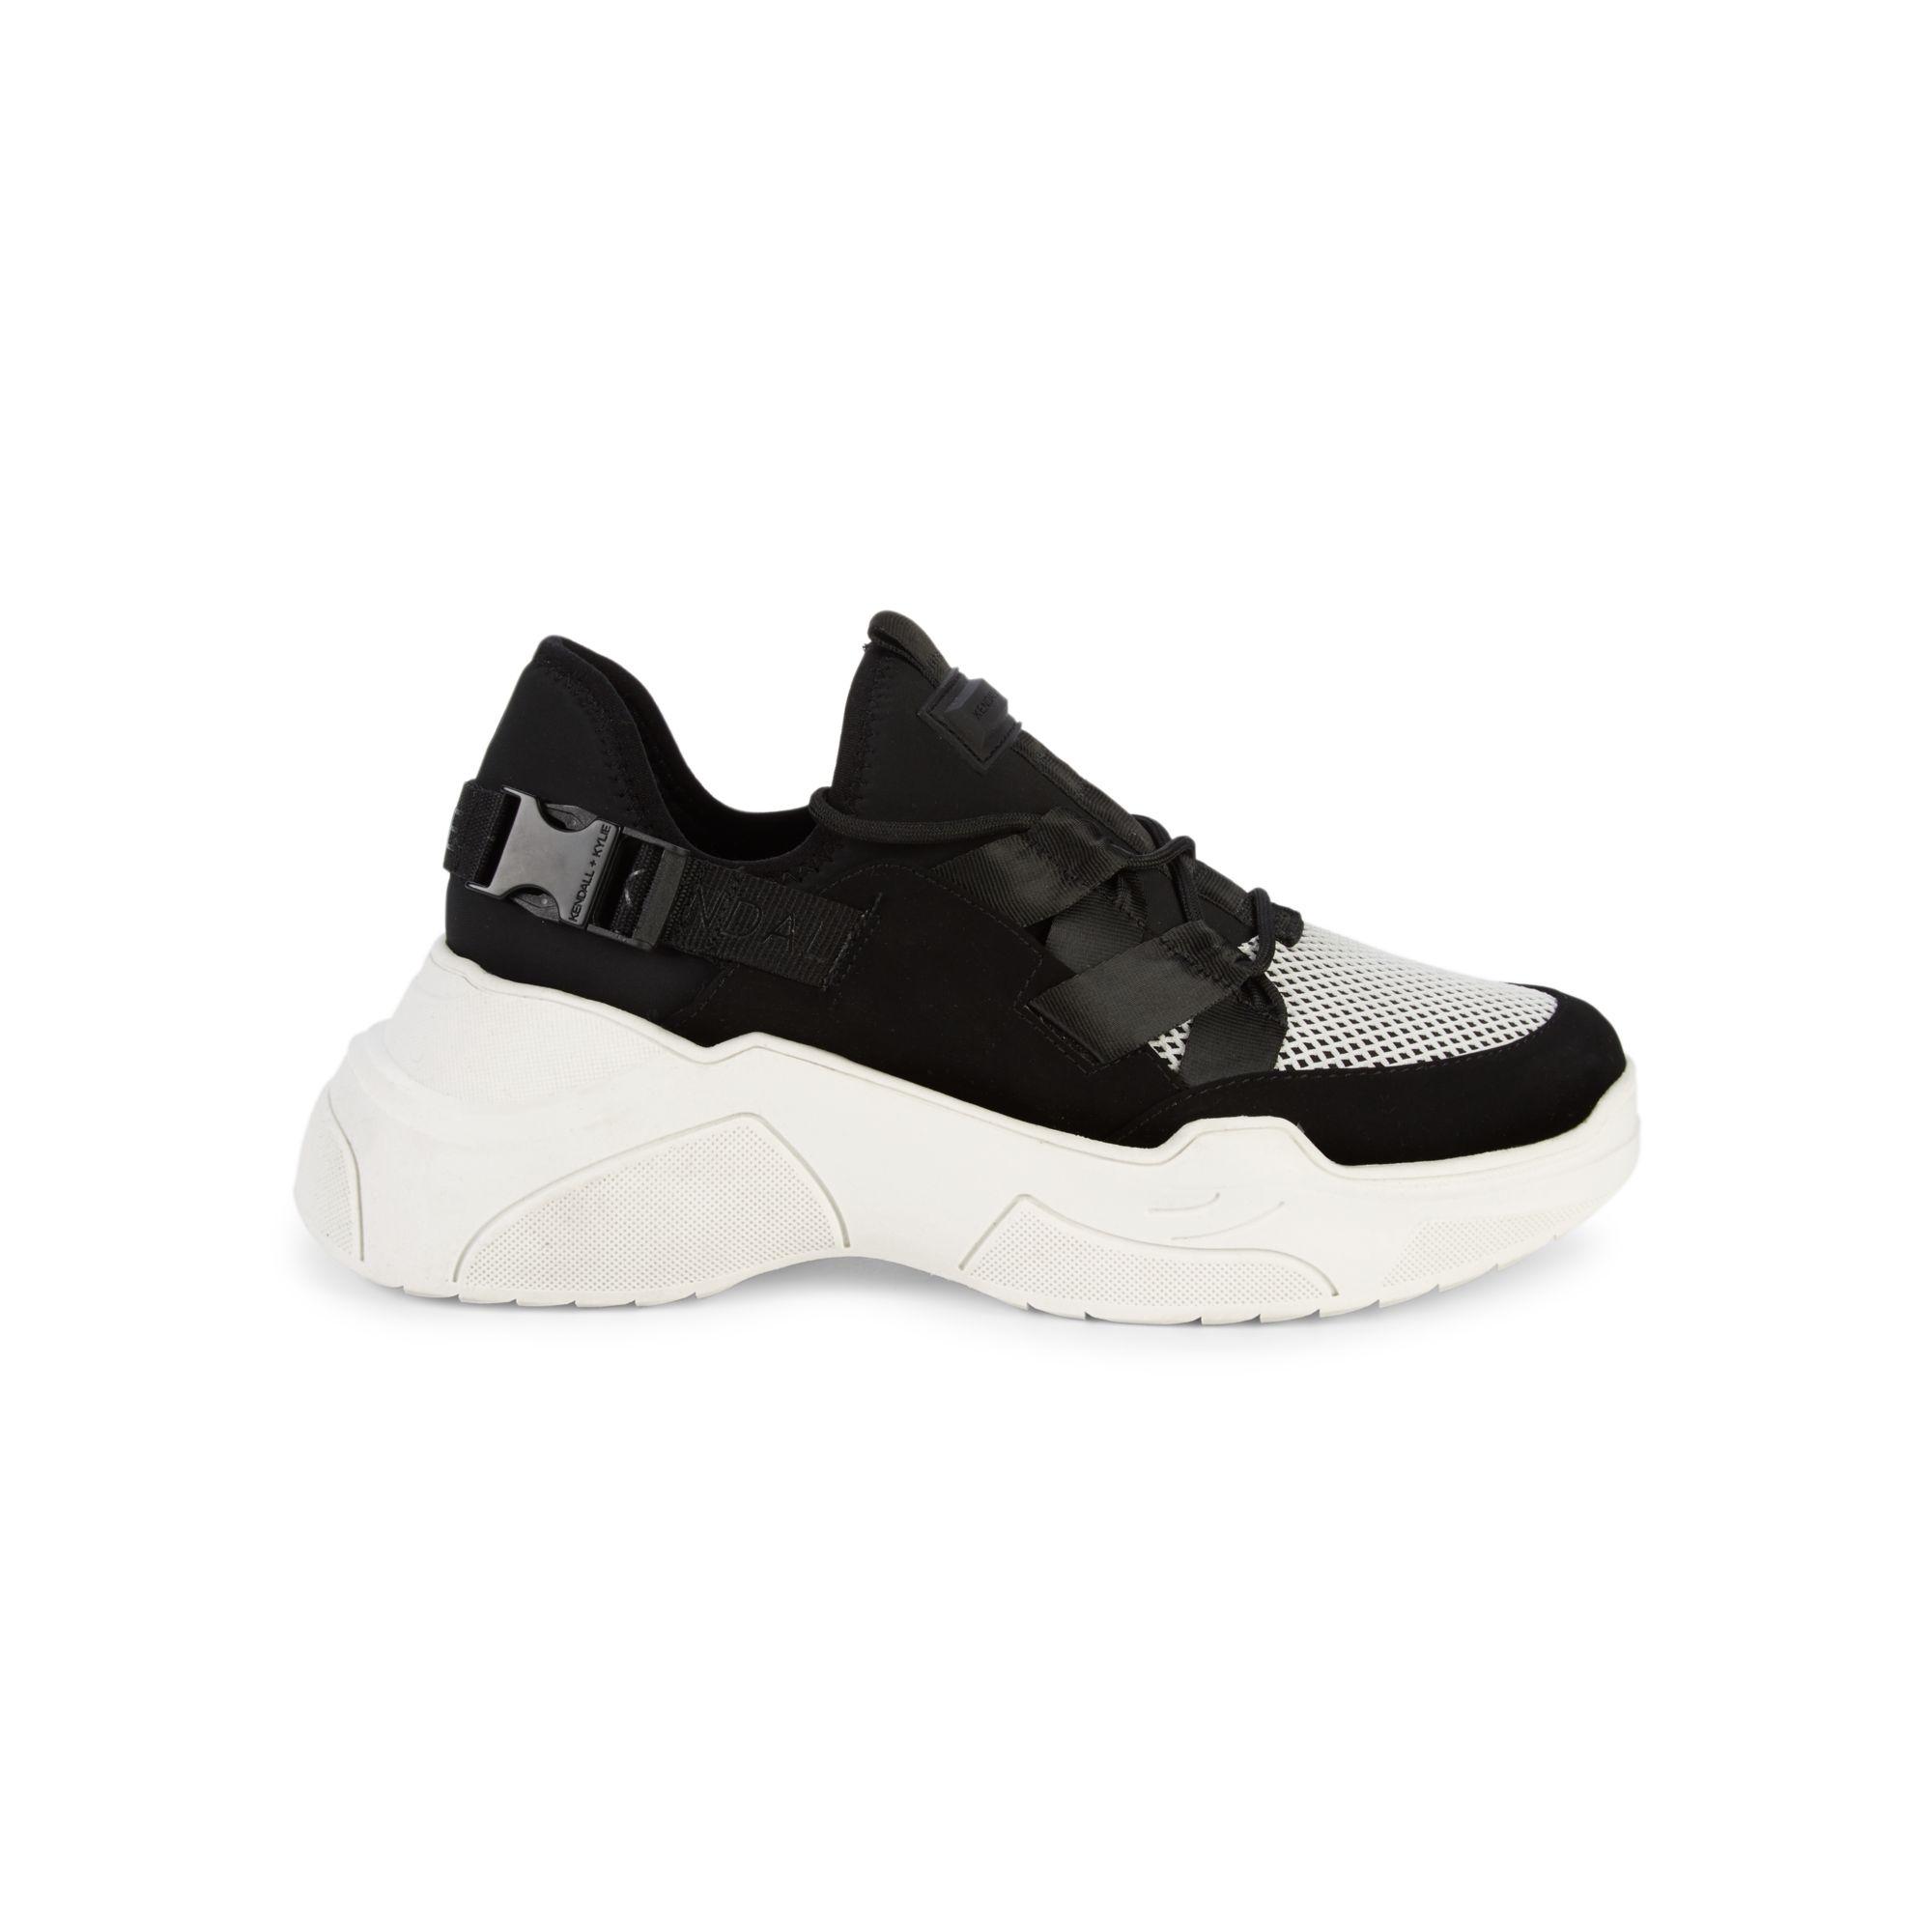 Kendall + Kylie Synthetic Lou Chunky Sneakers in Black White (Black) - Lyst